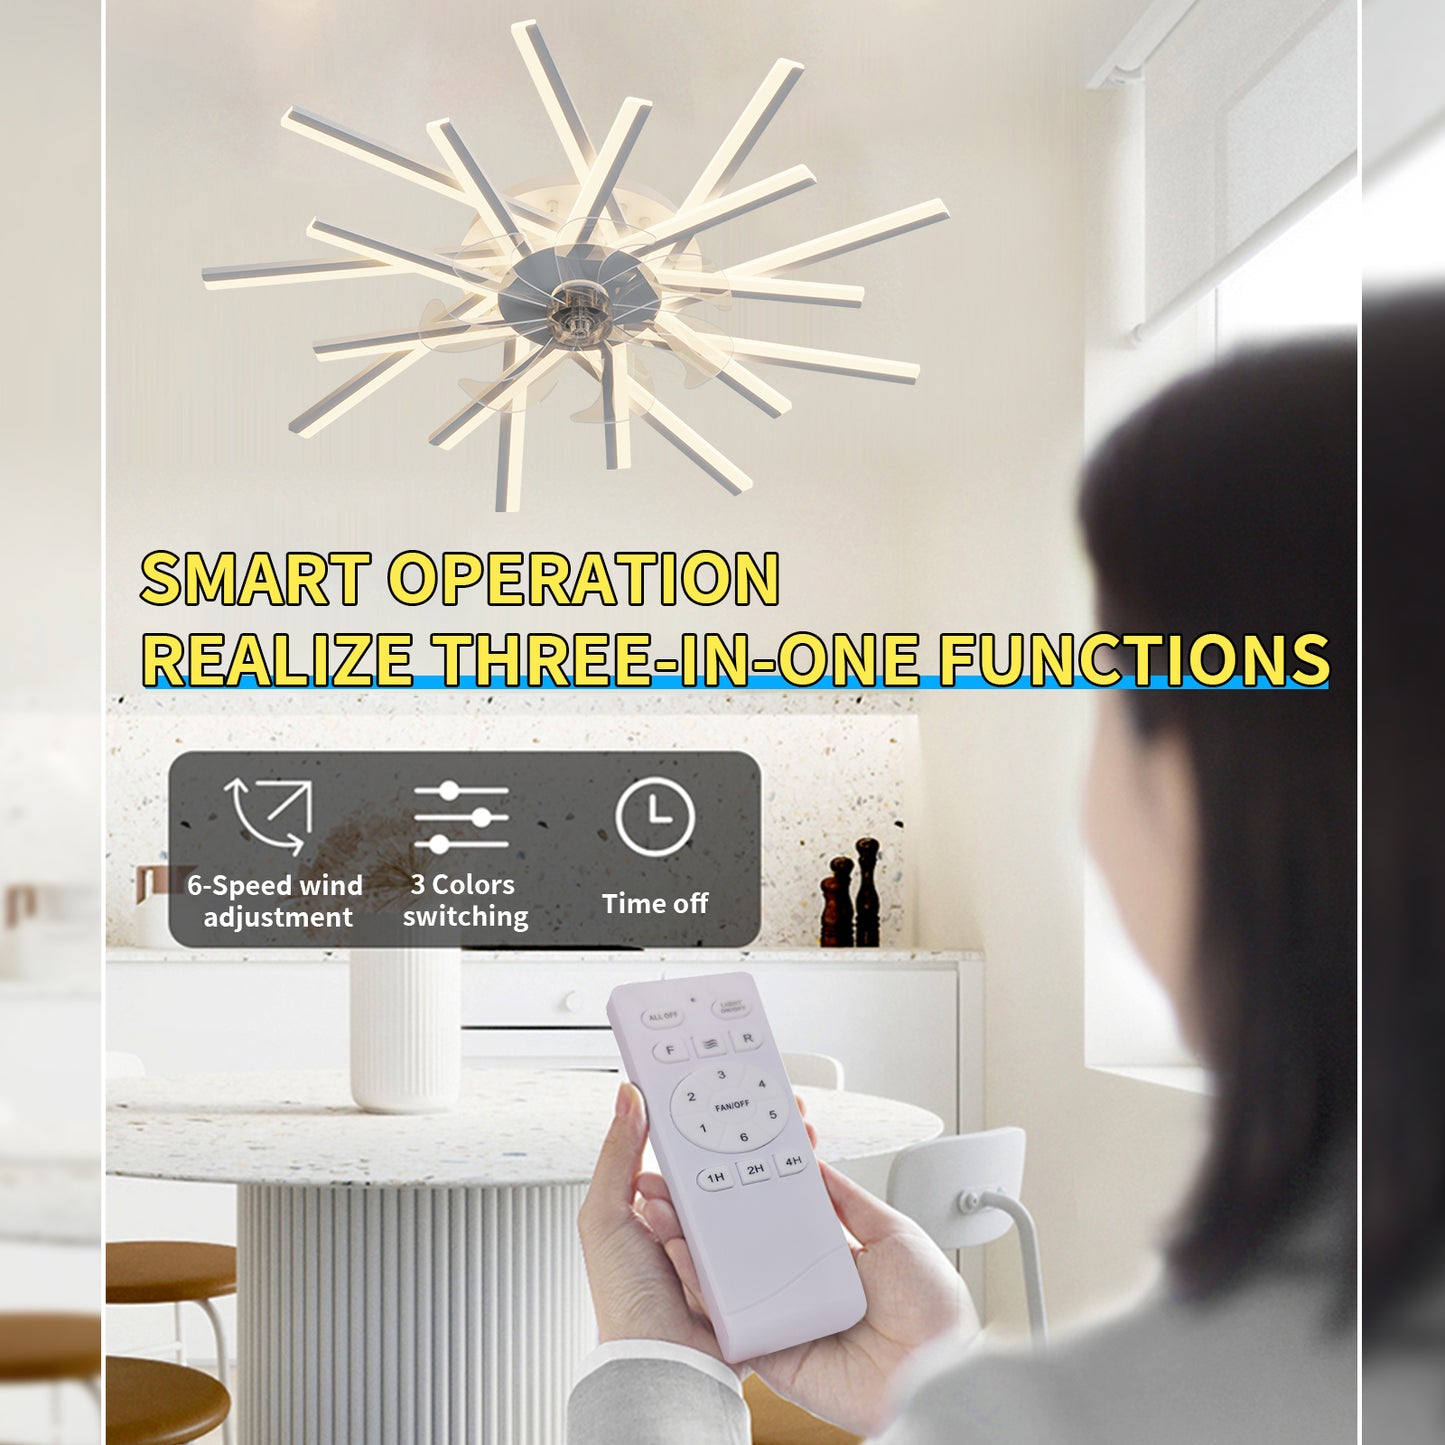 Modern 36-Inch Ceiling Fan with Remote Control and Dimmable LED Lights